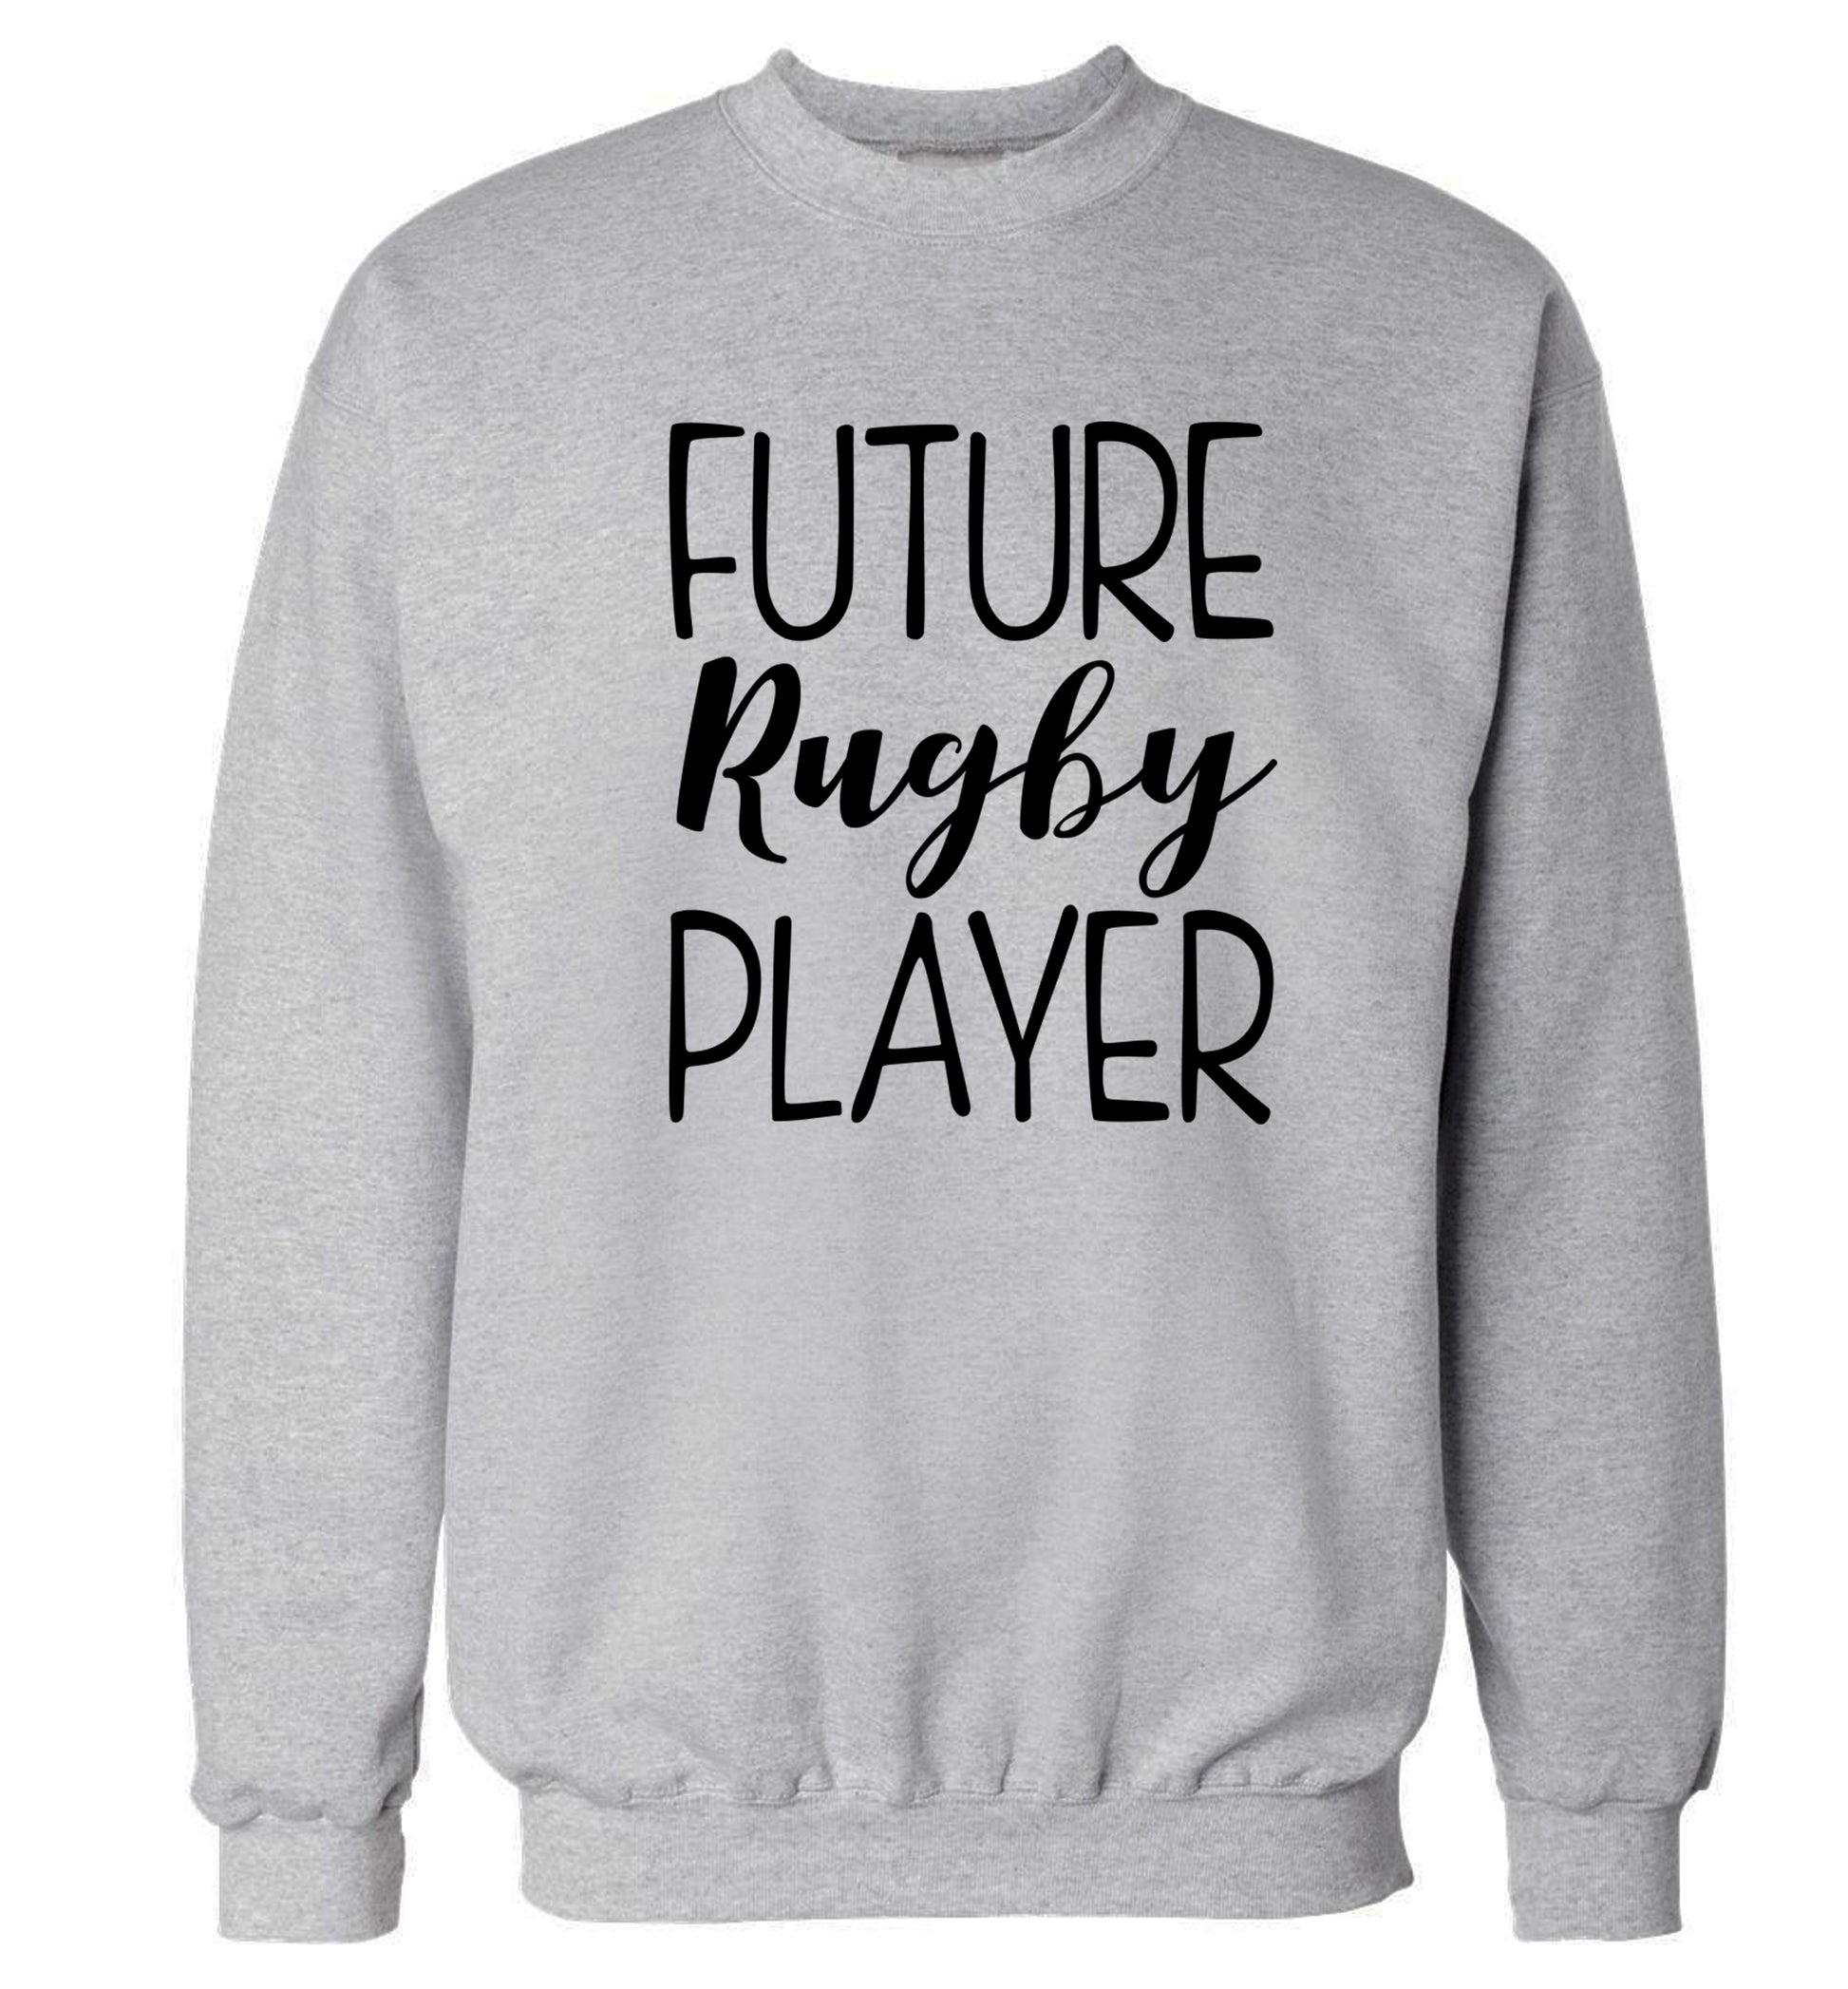 Future rugby player Adult's unisex grey Sweater 2XL